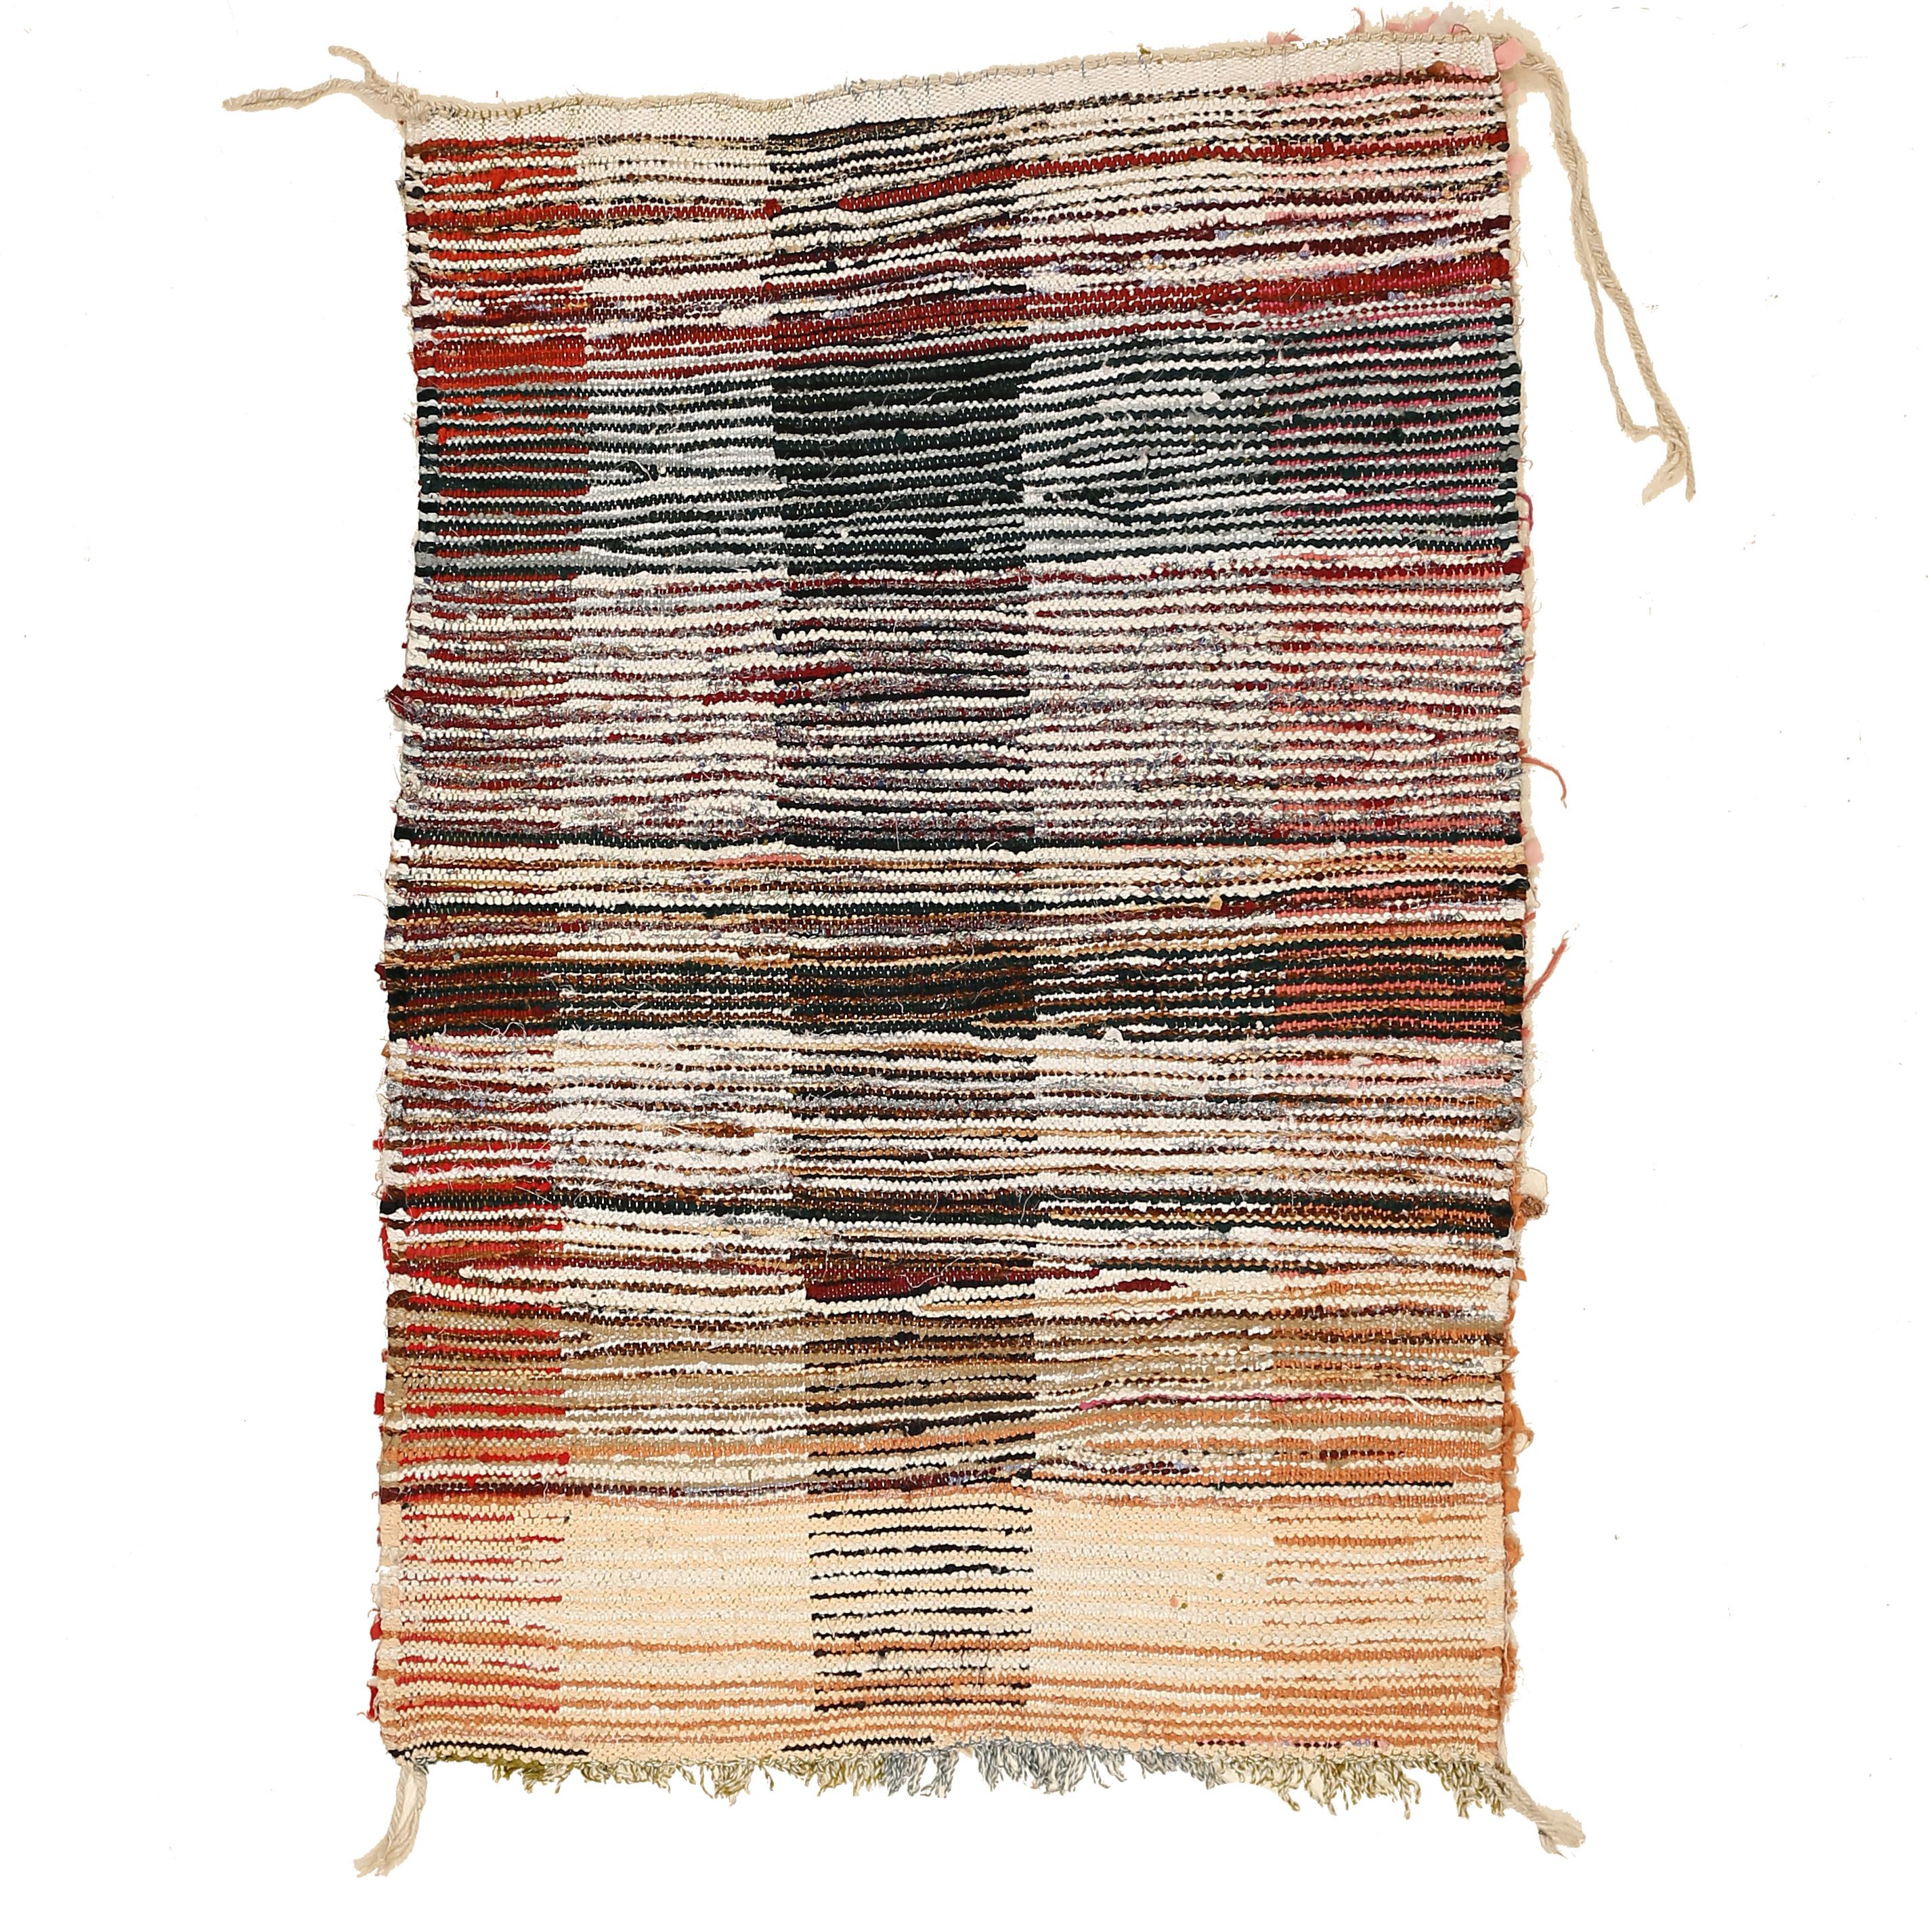 A very unusual Berber rug from the Boujad region, located on the foothills of the central High Atlas mountains of Morocco, distinguished by a Minimalist composition of vertical stripes in contrasting shades of ivory, red and blue. Hand knotted by